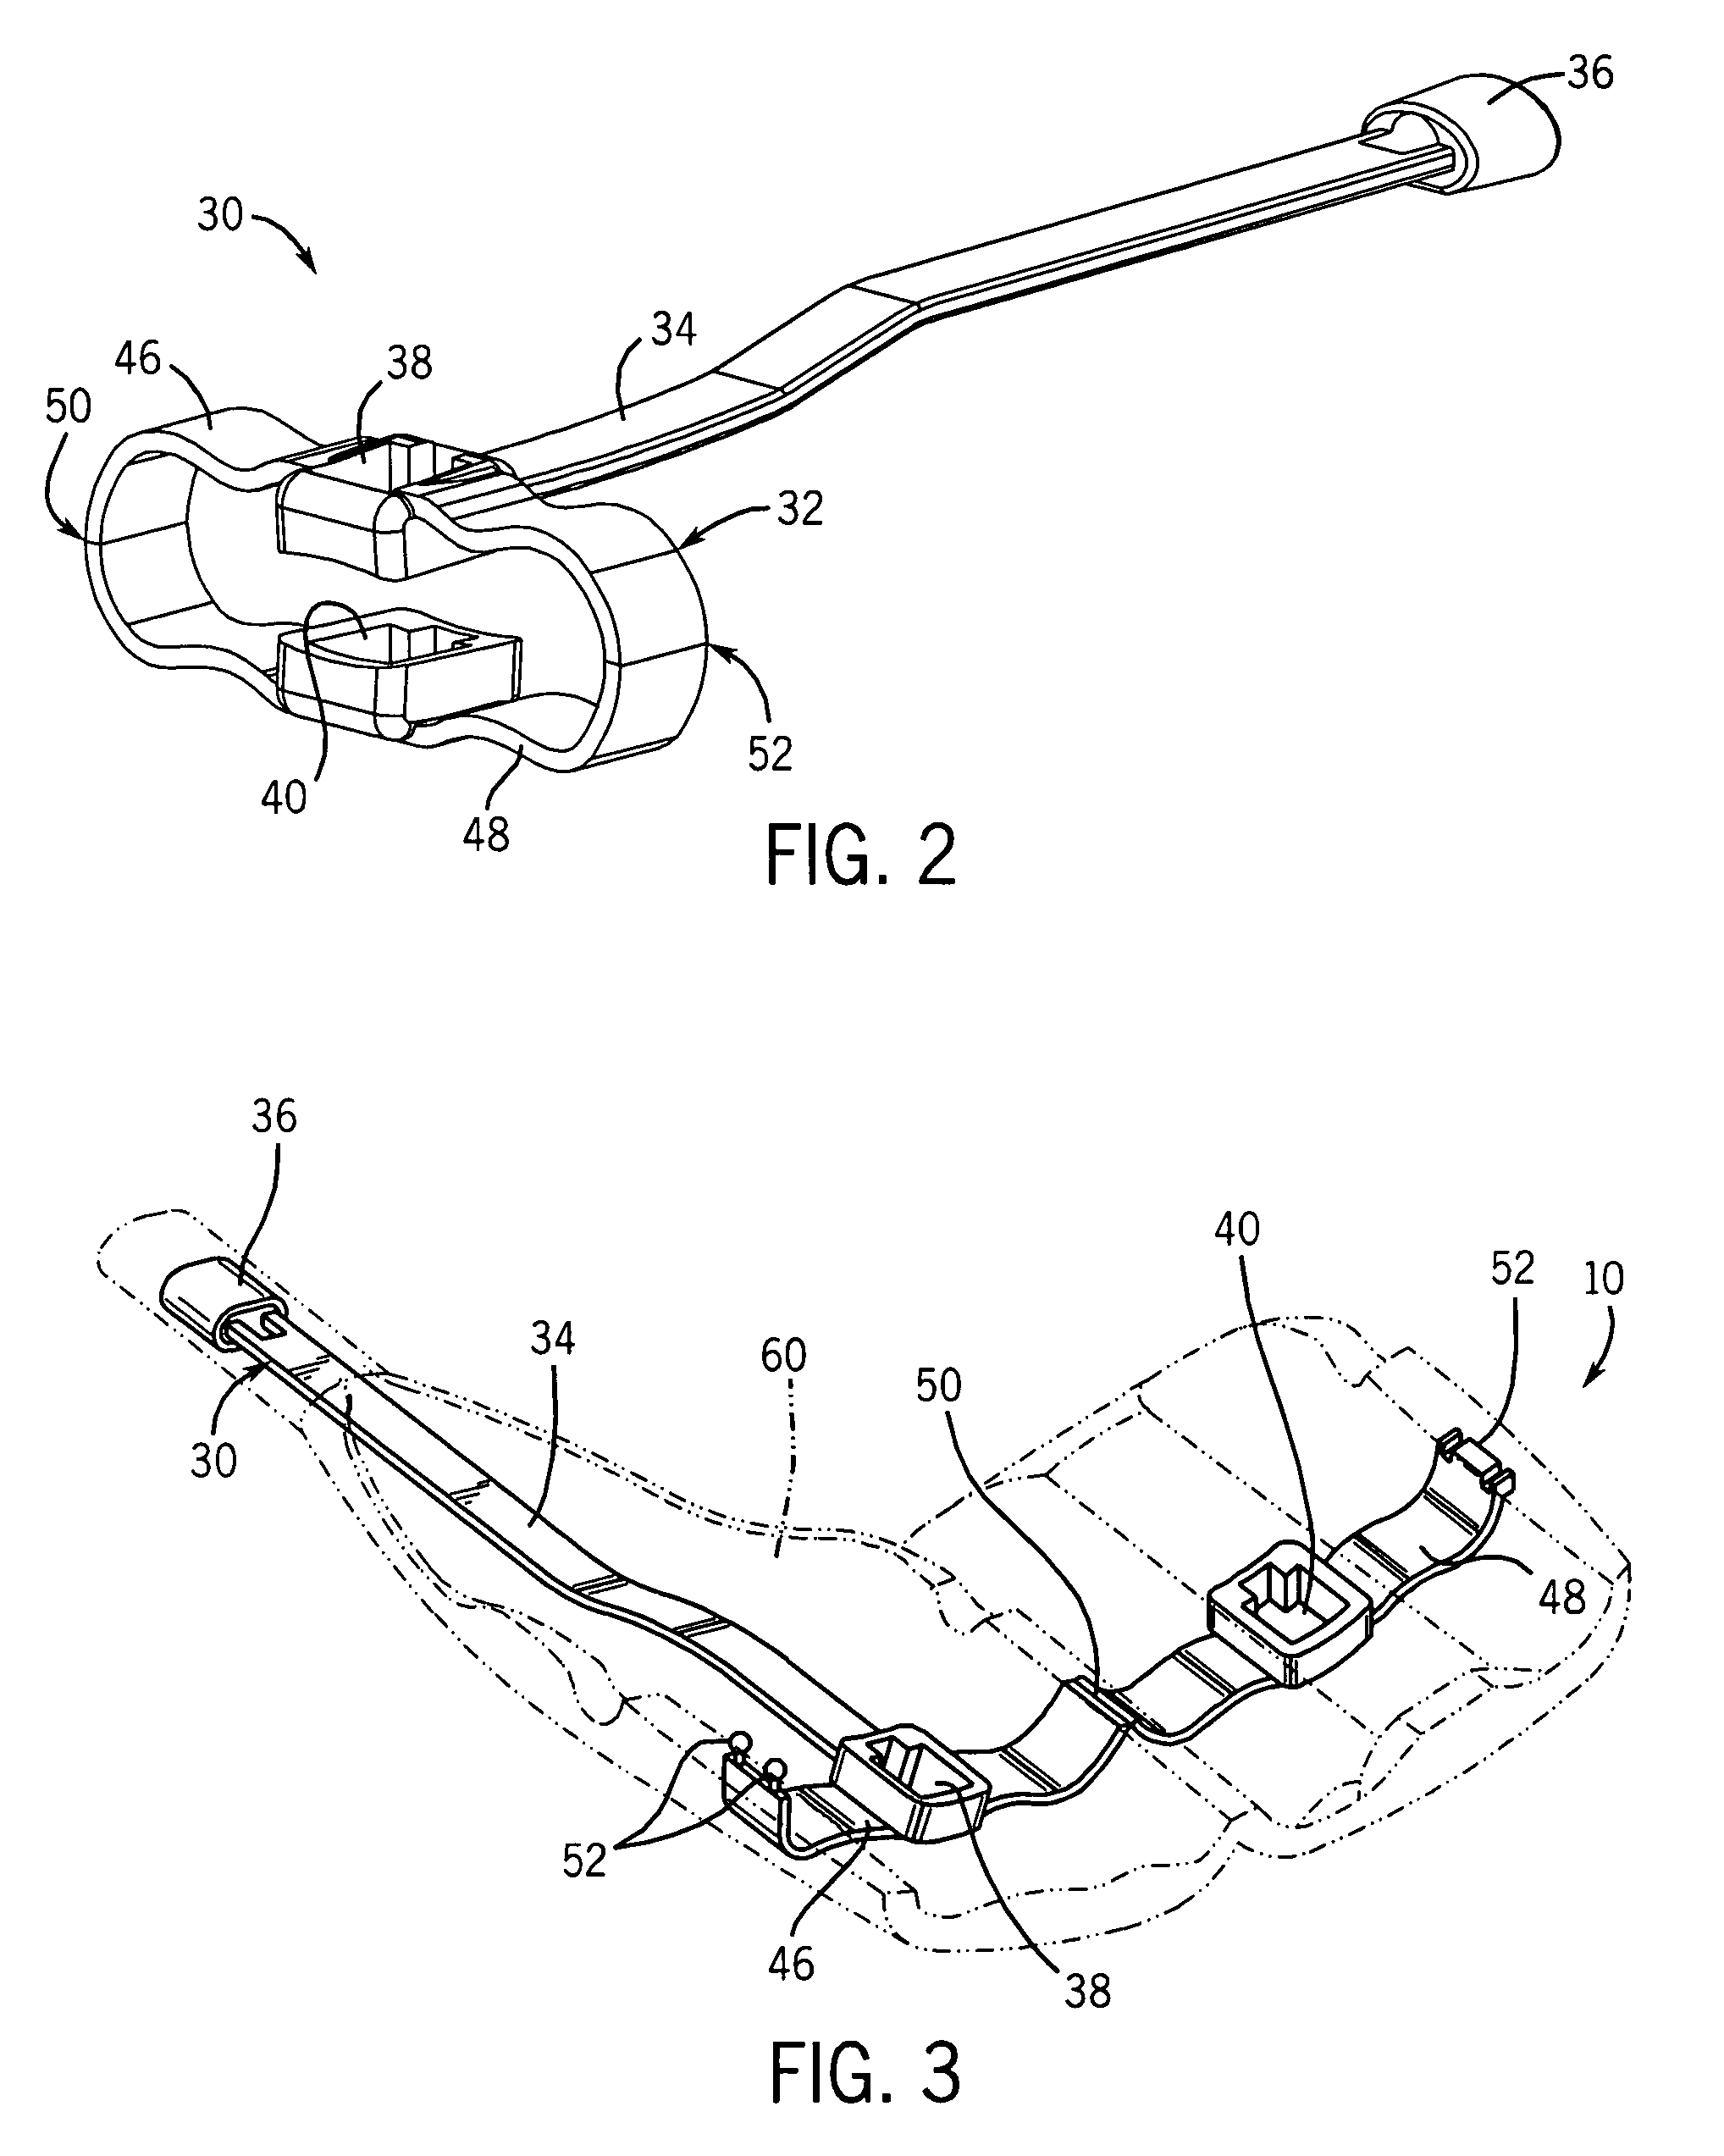 Compliant diaphragm medical sensor and technique for using the same